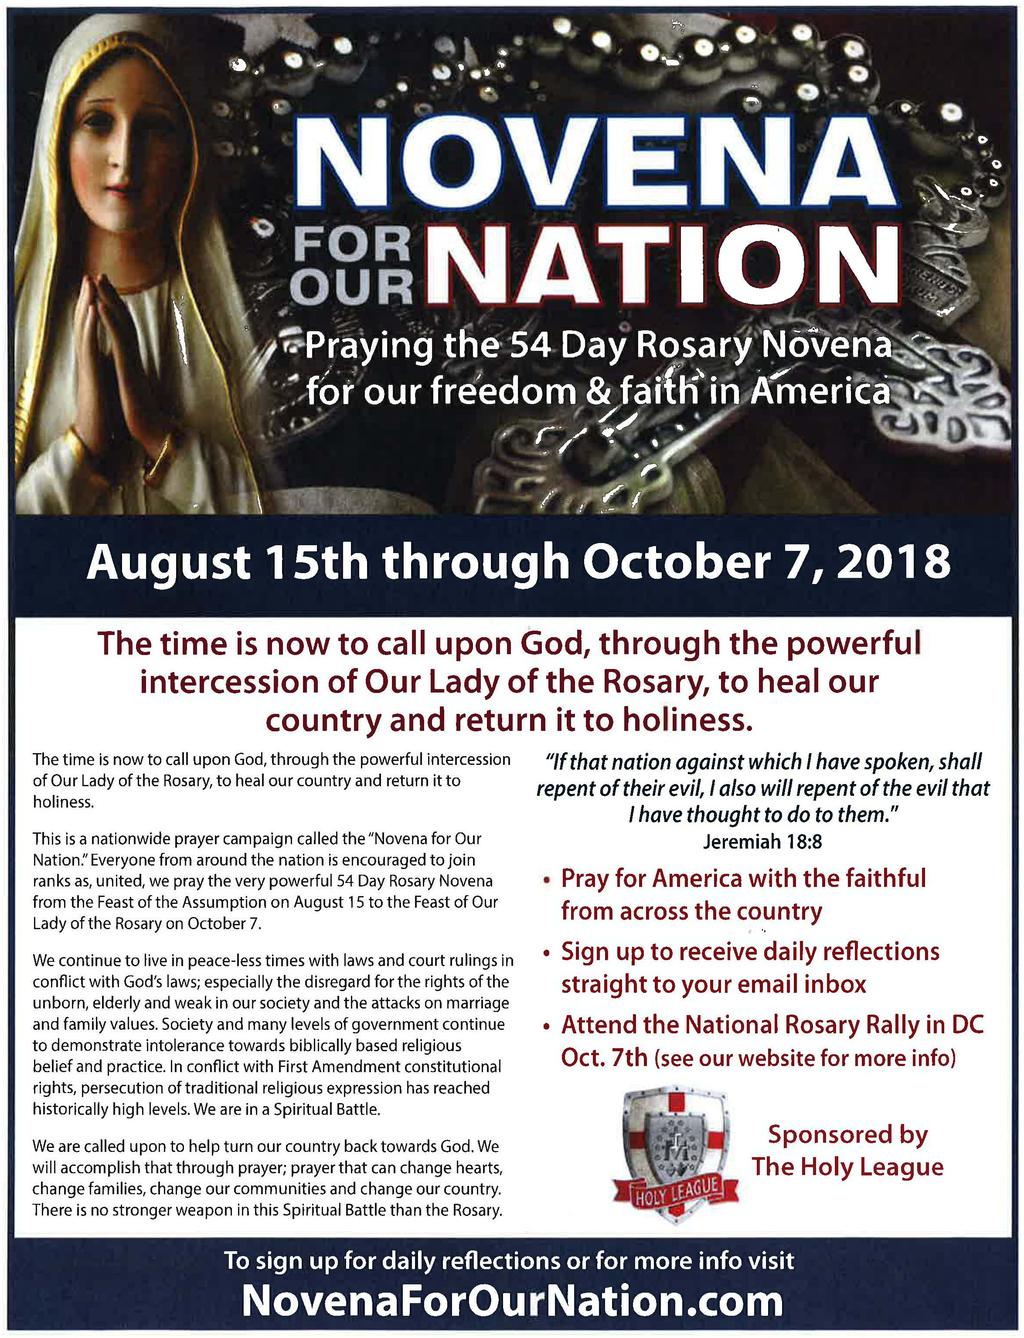 August 26, 2018 Every First Saturday join in praying 1000 Hail Marys in the church at 6:30pm 7